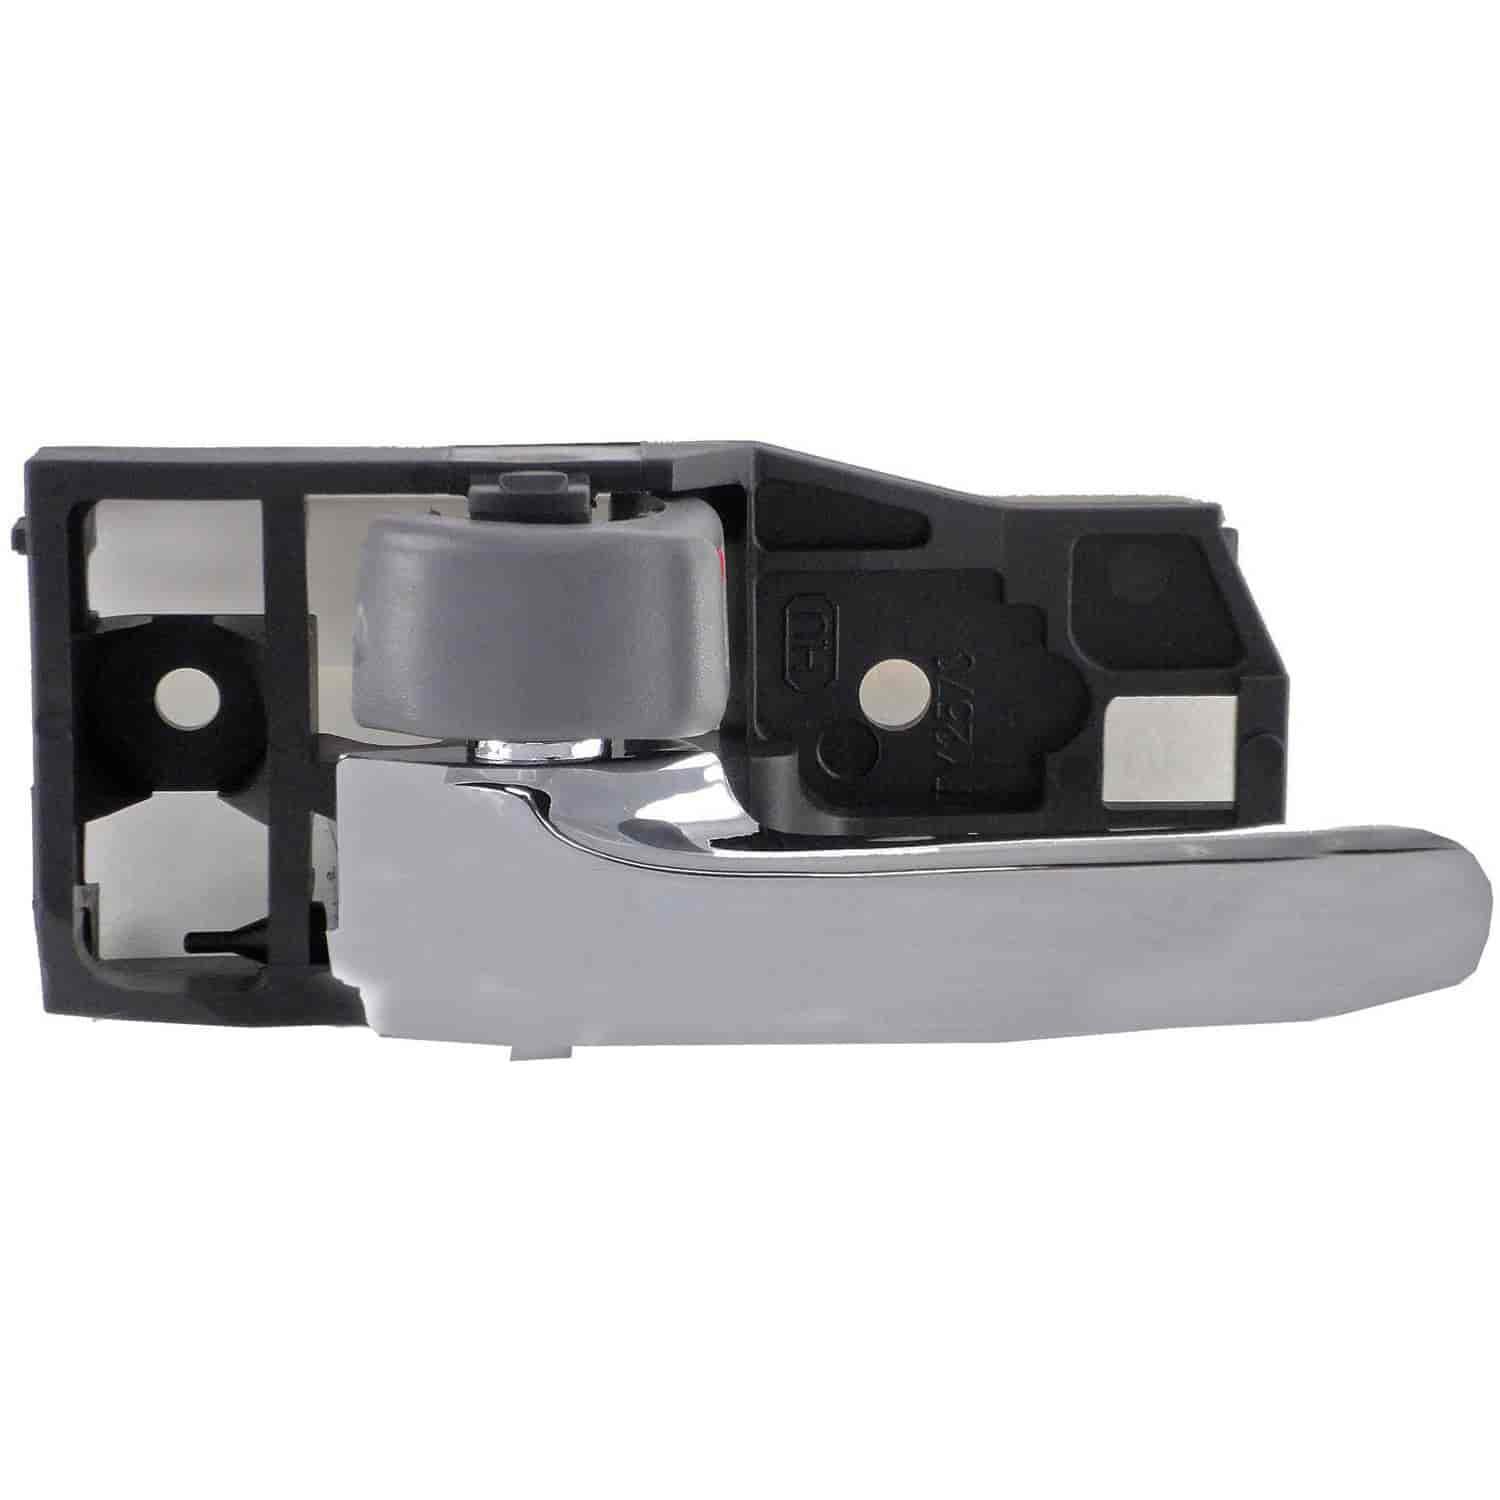 Interior Door Handle Front Left Rear Left Gray and Chrome